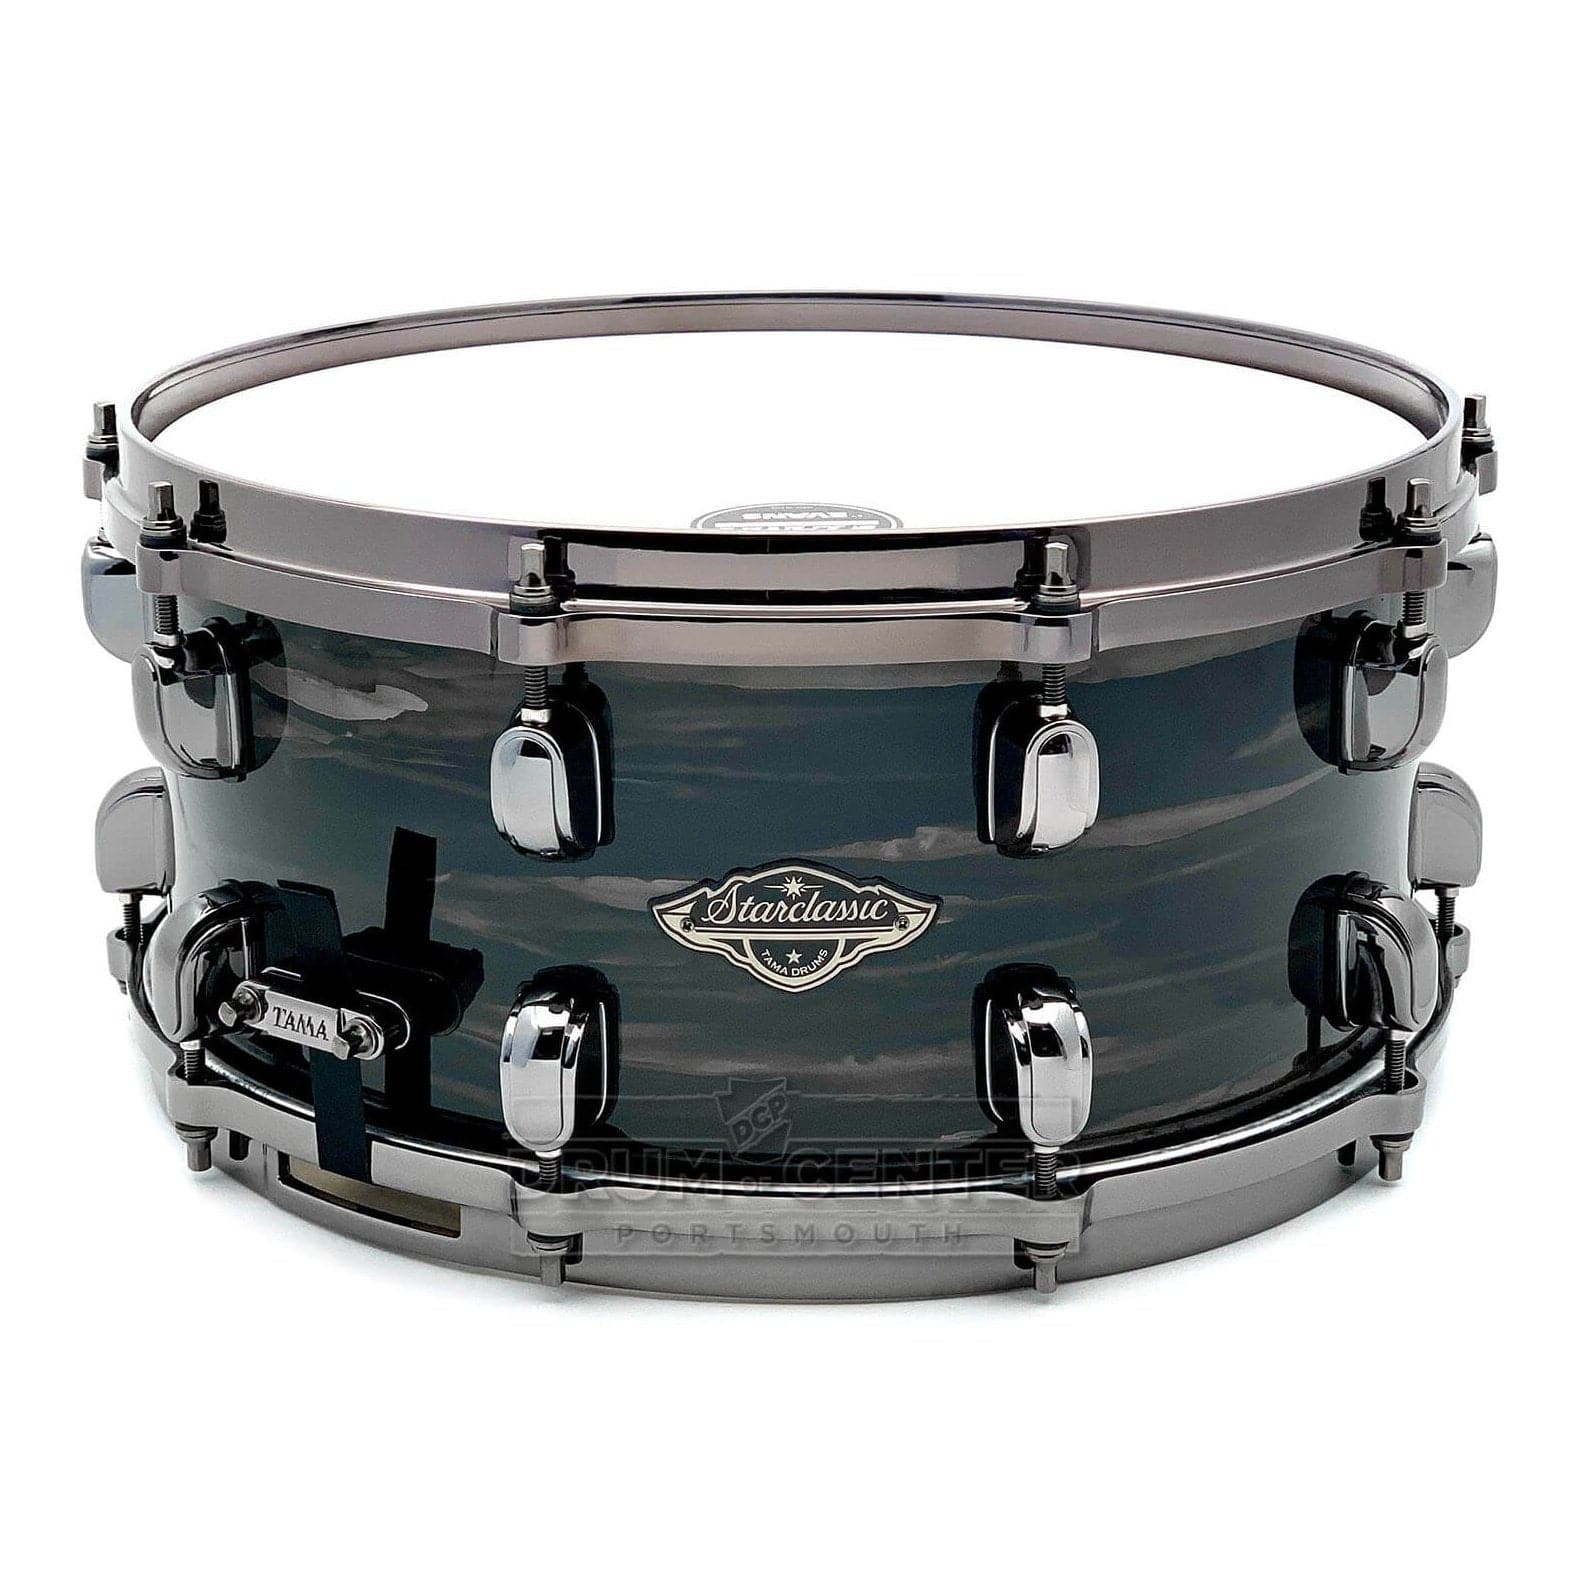 PDP Limited Dry Maple Snare, Dark Walnut 12x8 – Drum Center Of